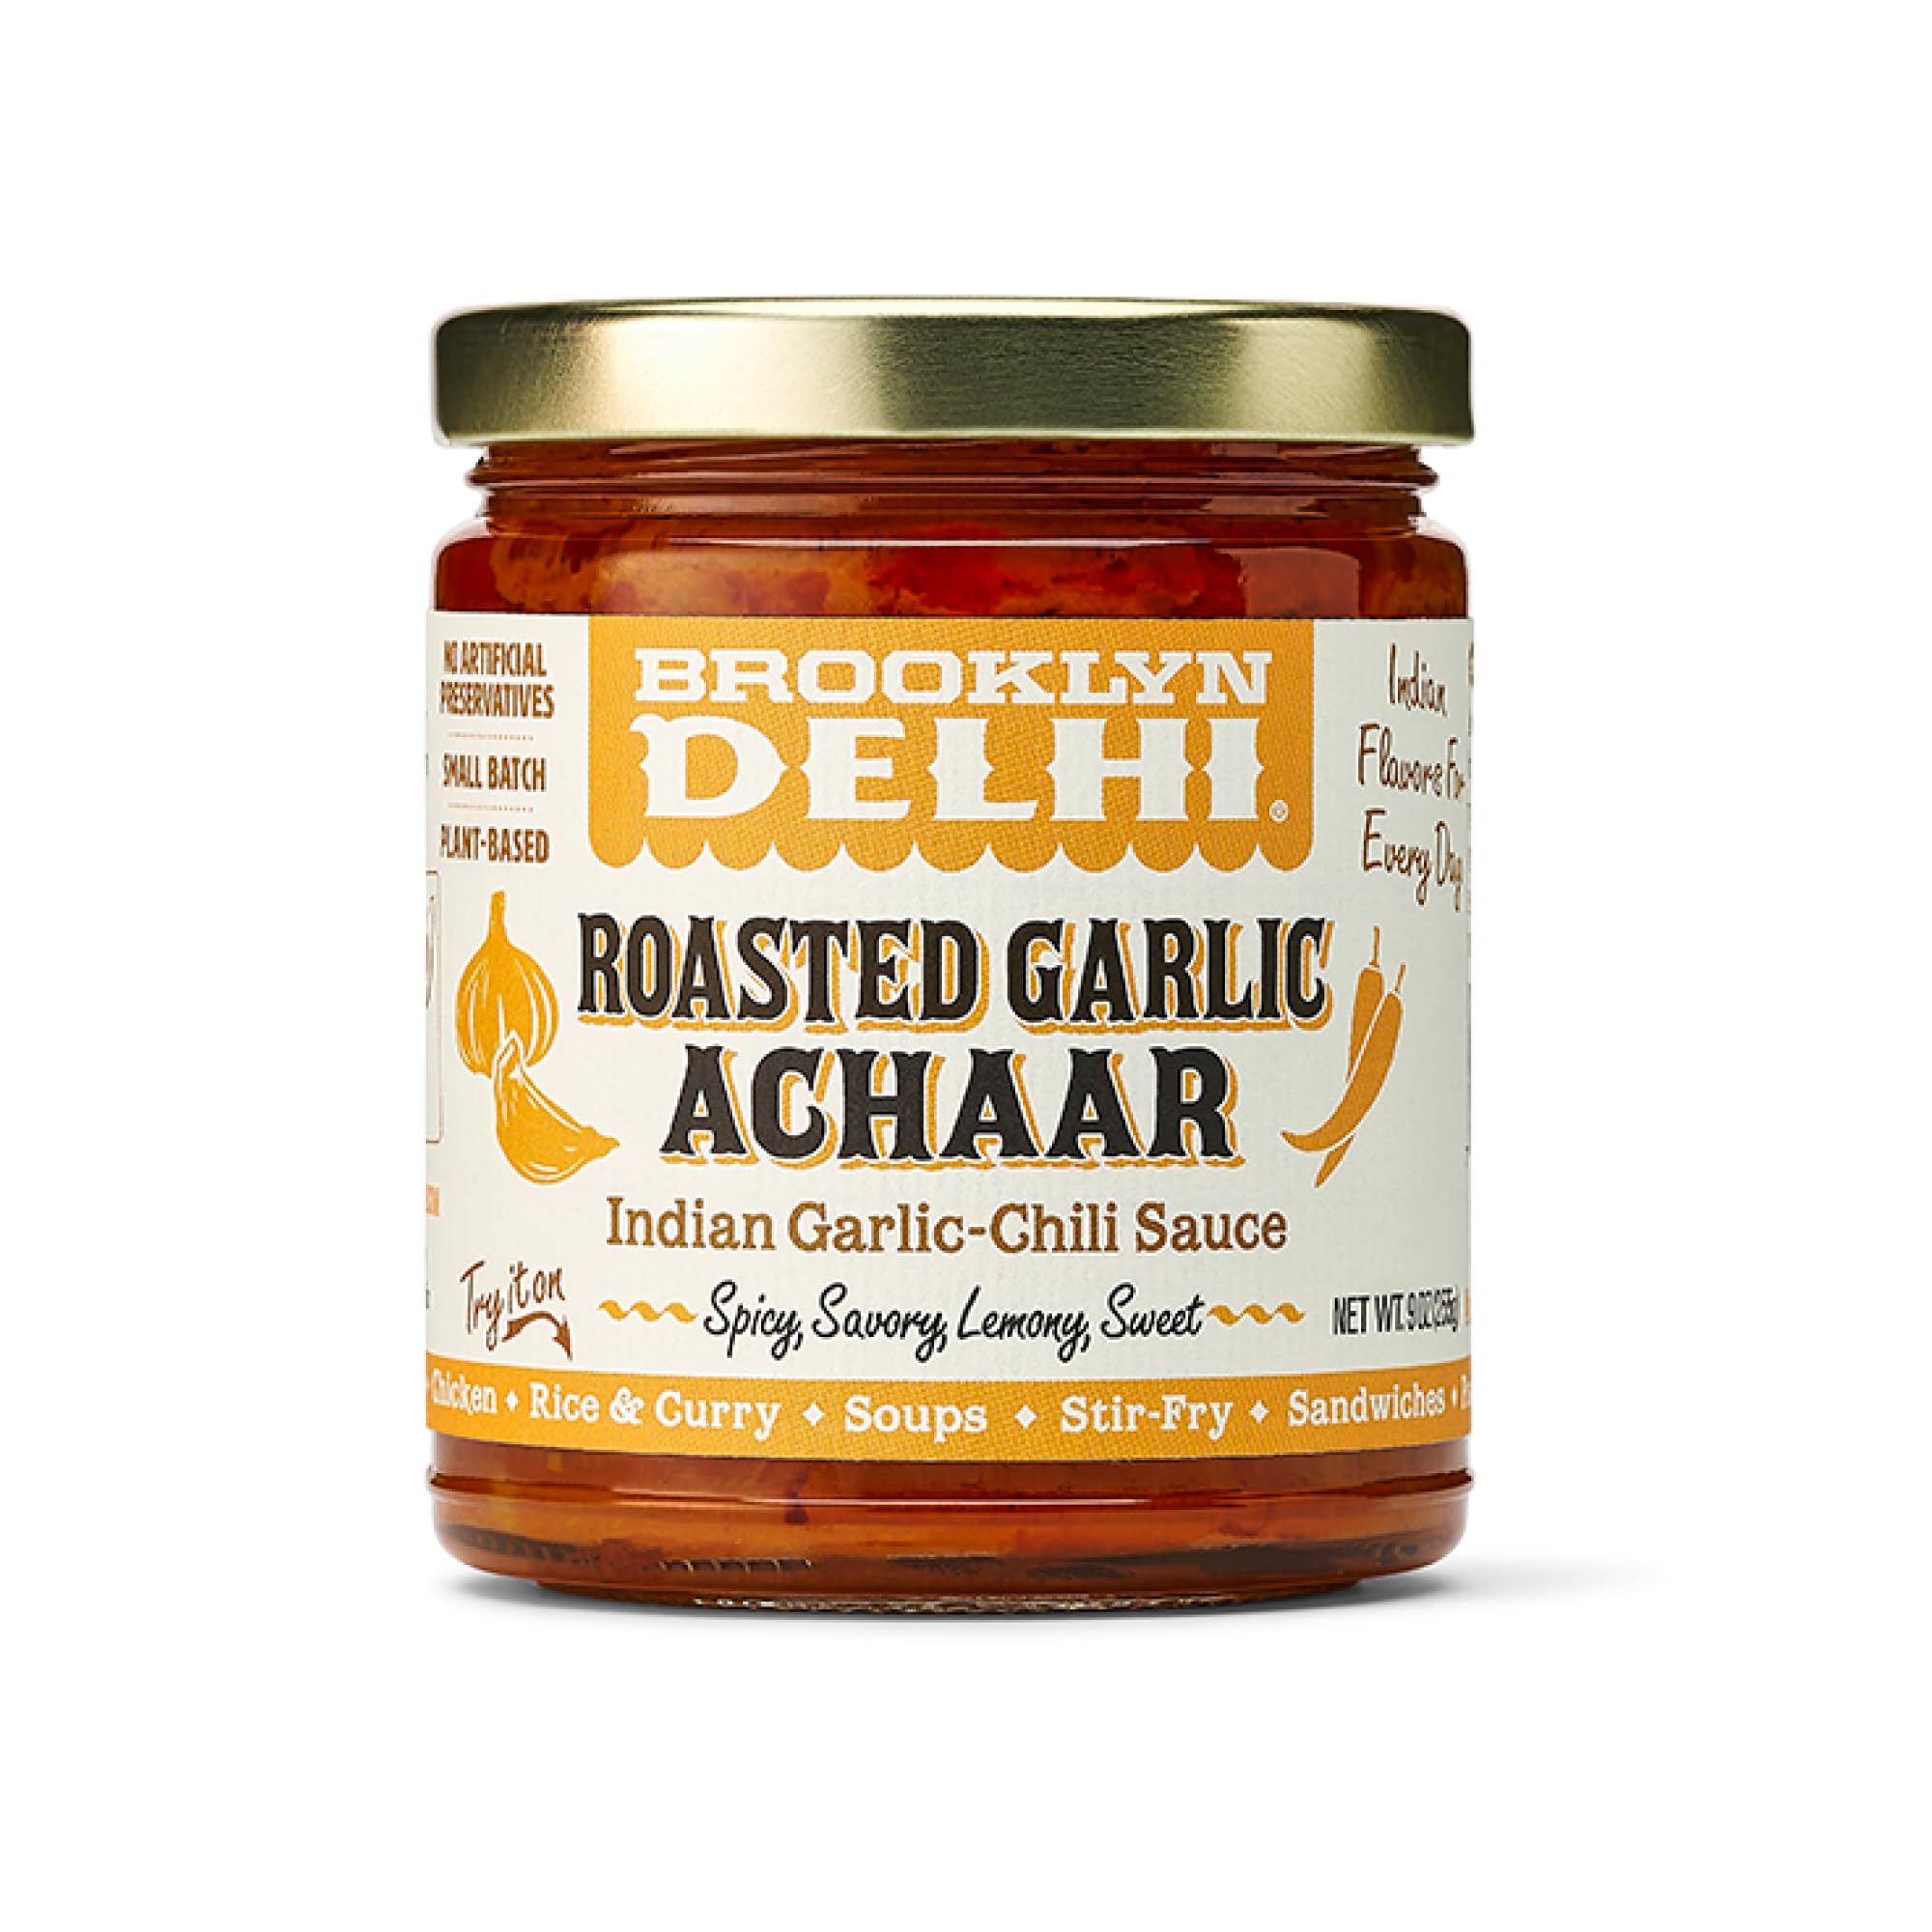 Brooklyn Delhi Roasted Garlic Achaar | Spicy, Lemony, Savory, Sweet Flavor | Made with Indian Spices, Red Chili Powder, and Unrefined Cane Sugar | Vegan, Nothing Artificial (Pack of 1)